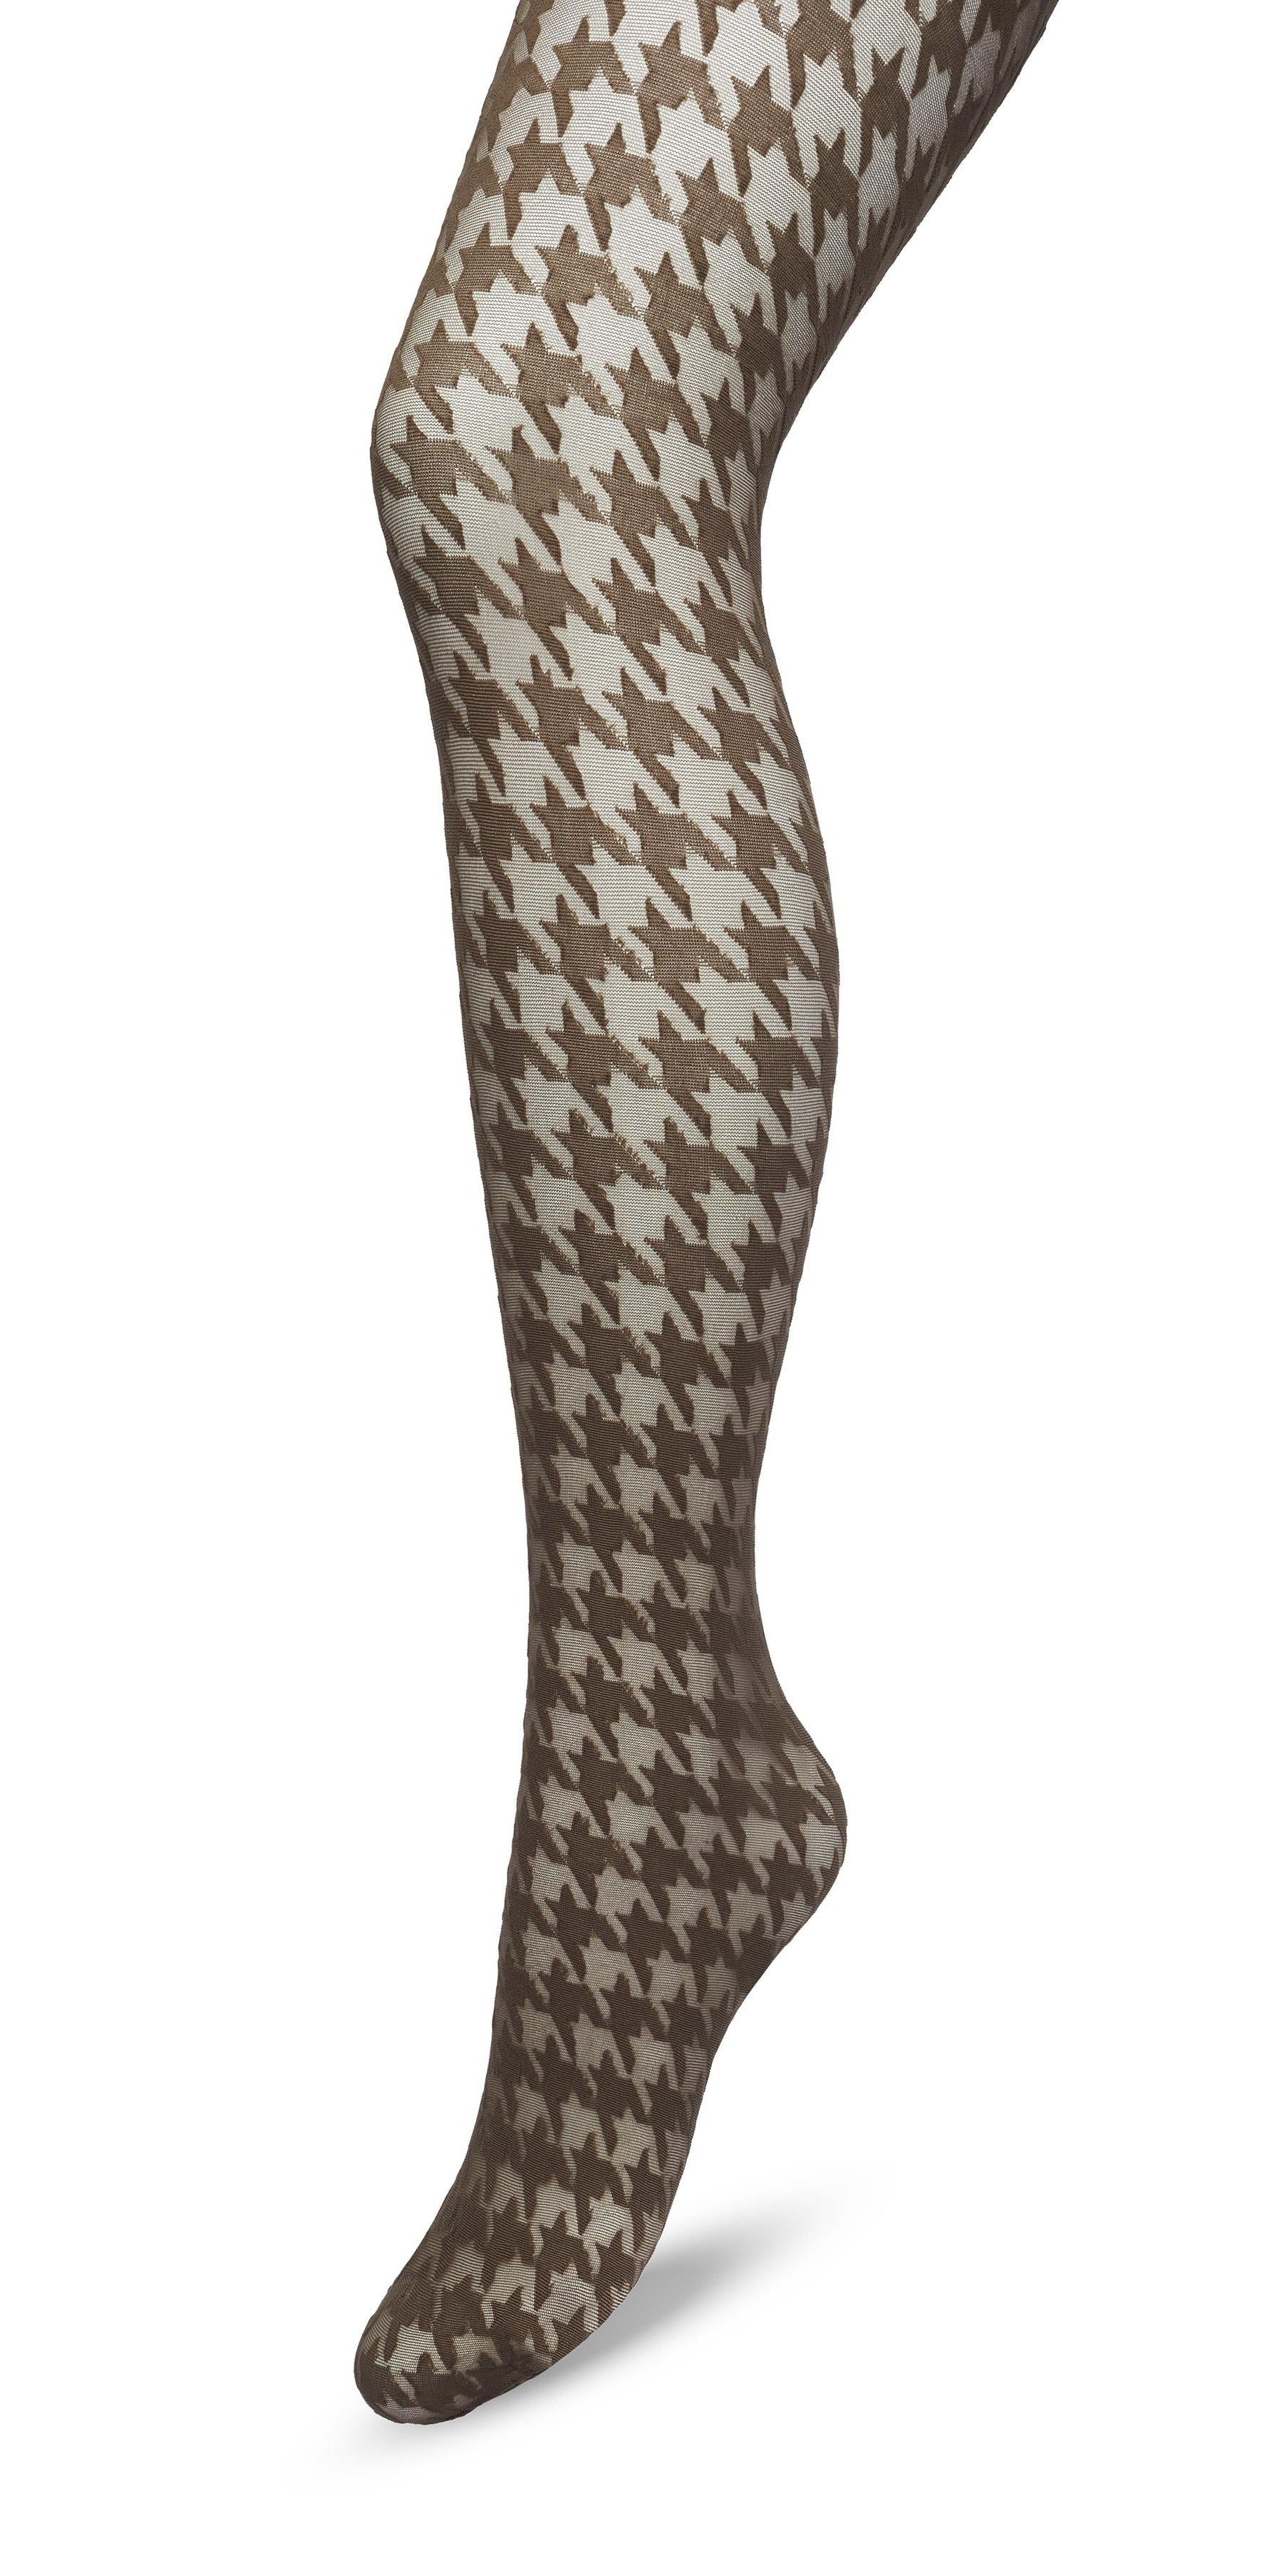 Bonnie Doon BP221903 Houndstooth Tights - Sheer brown fashion tights with a woven opaque dogtooth pattern.